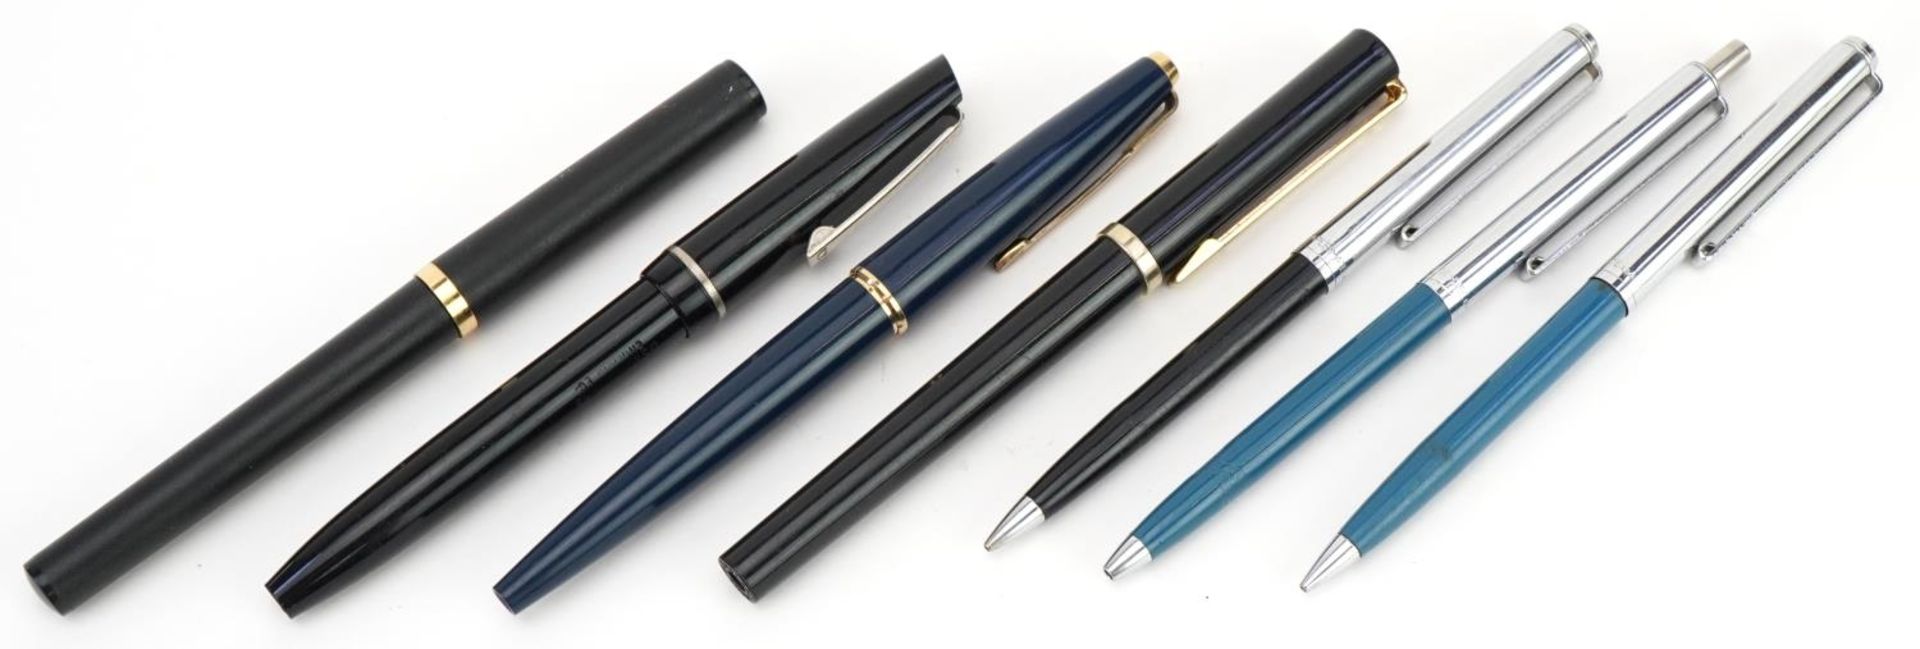 Vintage and later fountain pens and propelling pencils including Parker : For further information on - Image 2 of 3